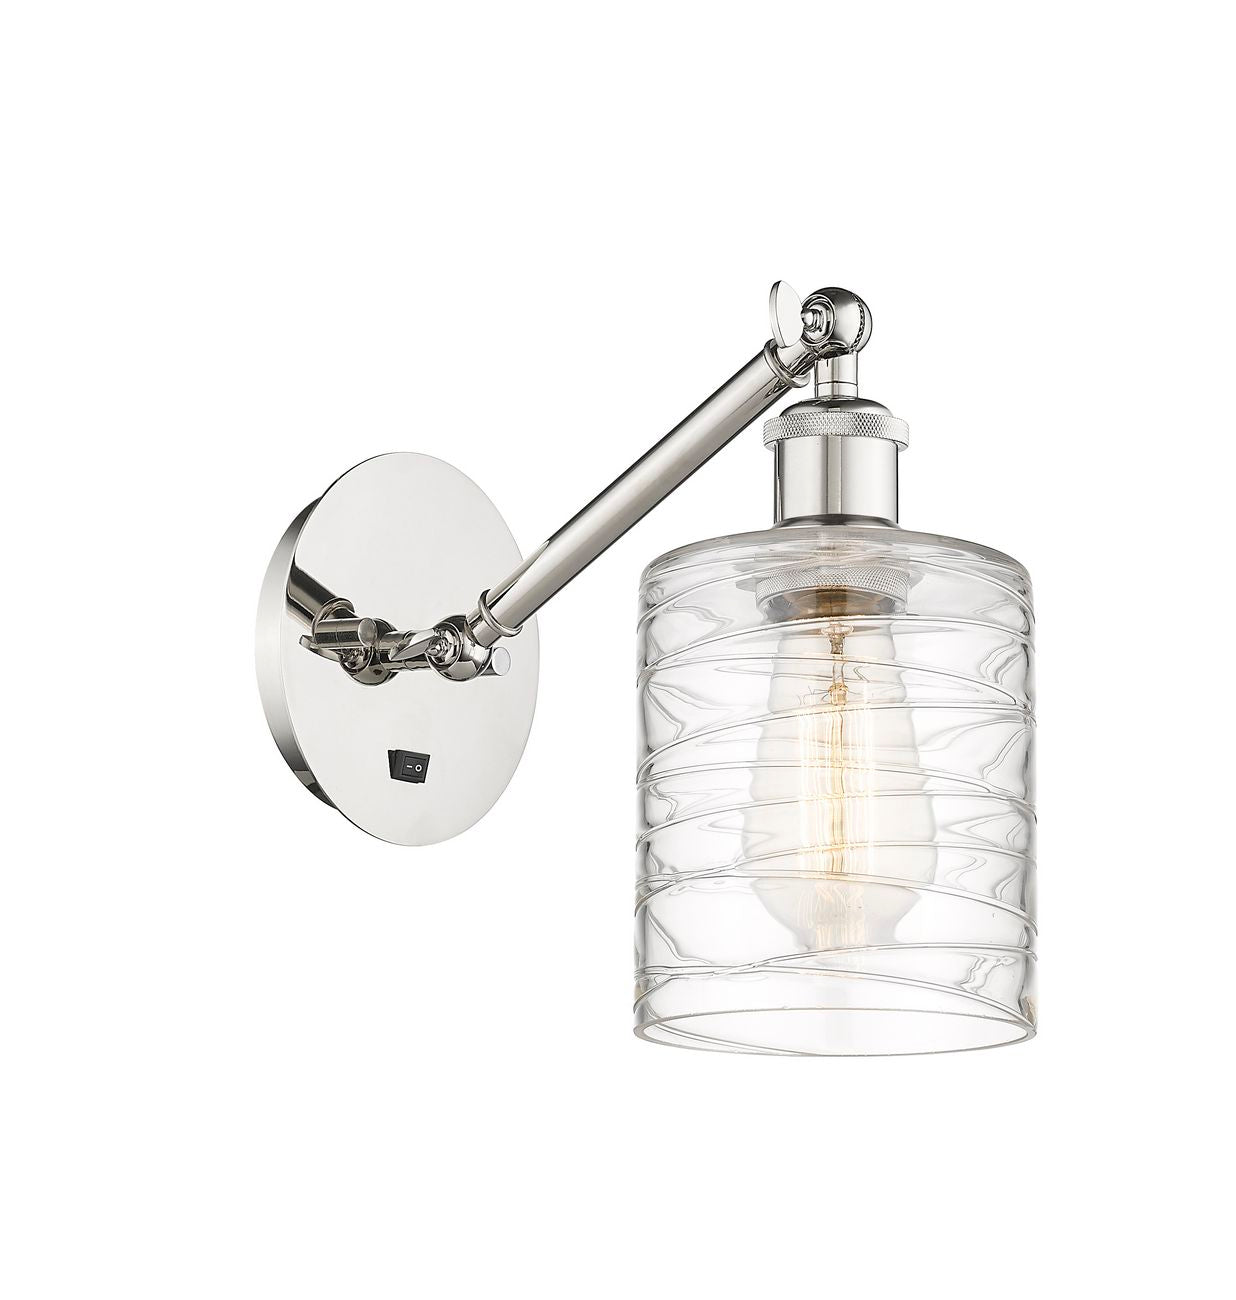 317-1W-PN-G1113 1-Light 5.3" Polished Nickel Sconce - Deco Swirl Cobbleskill Glass - LED Bulb - Dimmensions: 5.3 x 12.5 x 12.75 - Glass Up or Down: Yes